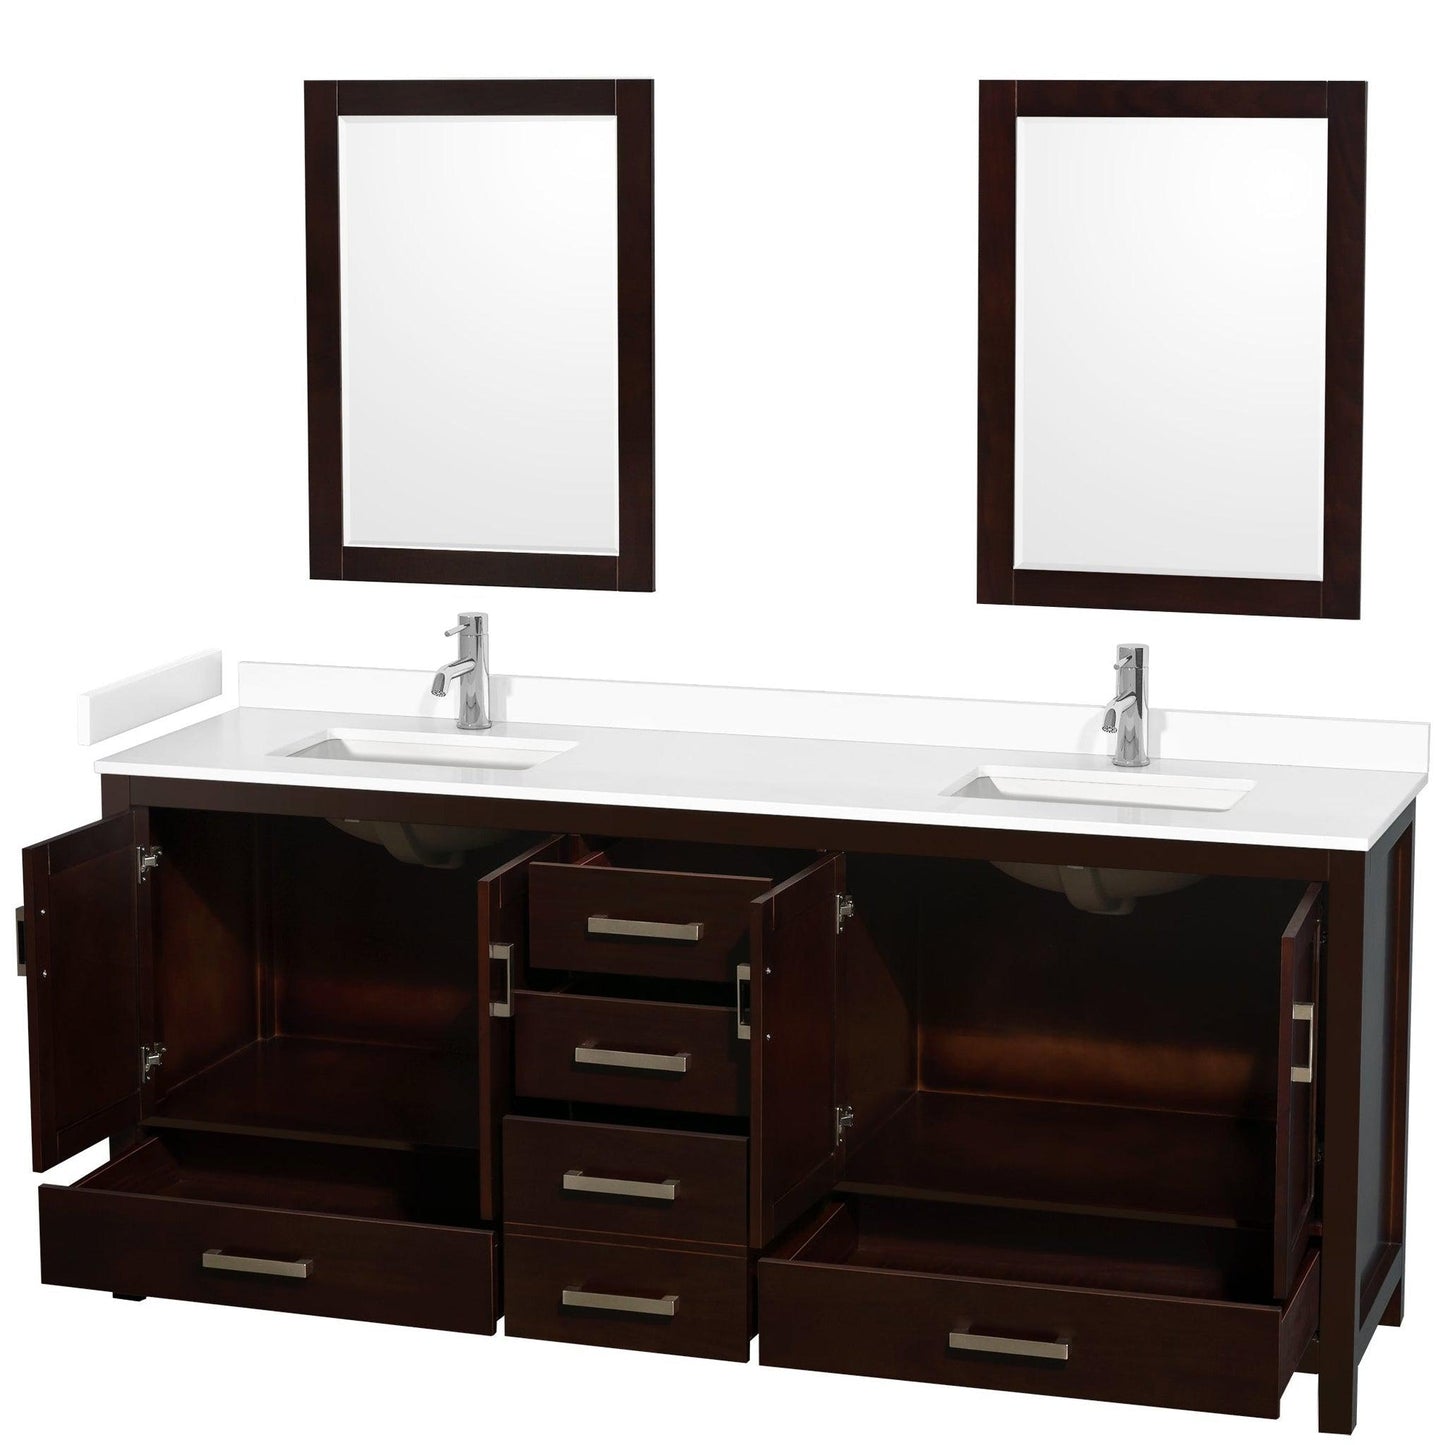 Wyndham Collection Sheffield 80" Double Bathroom Vanity in Espresso, White Cultured Marble Countertop, Undermount Square Sinks, 24" Mirror